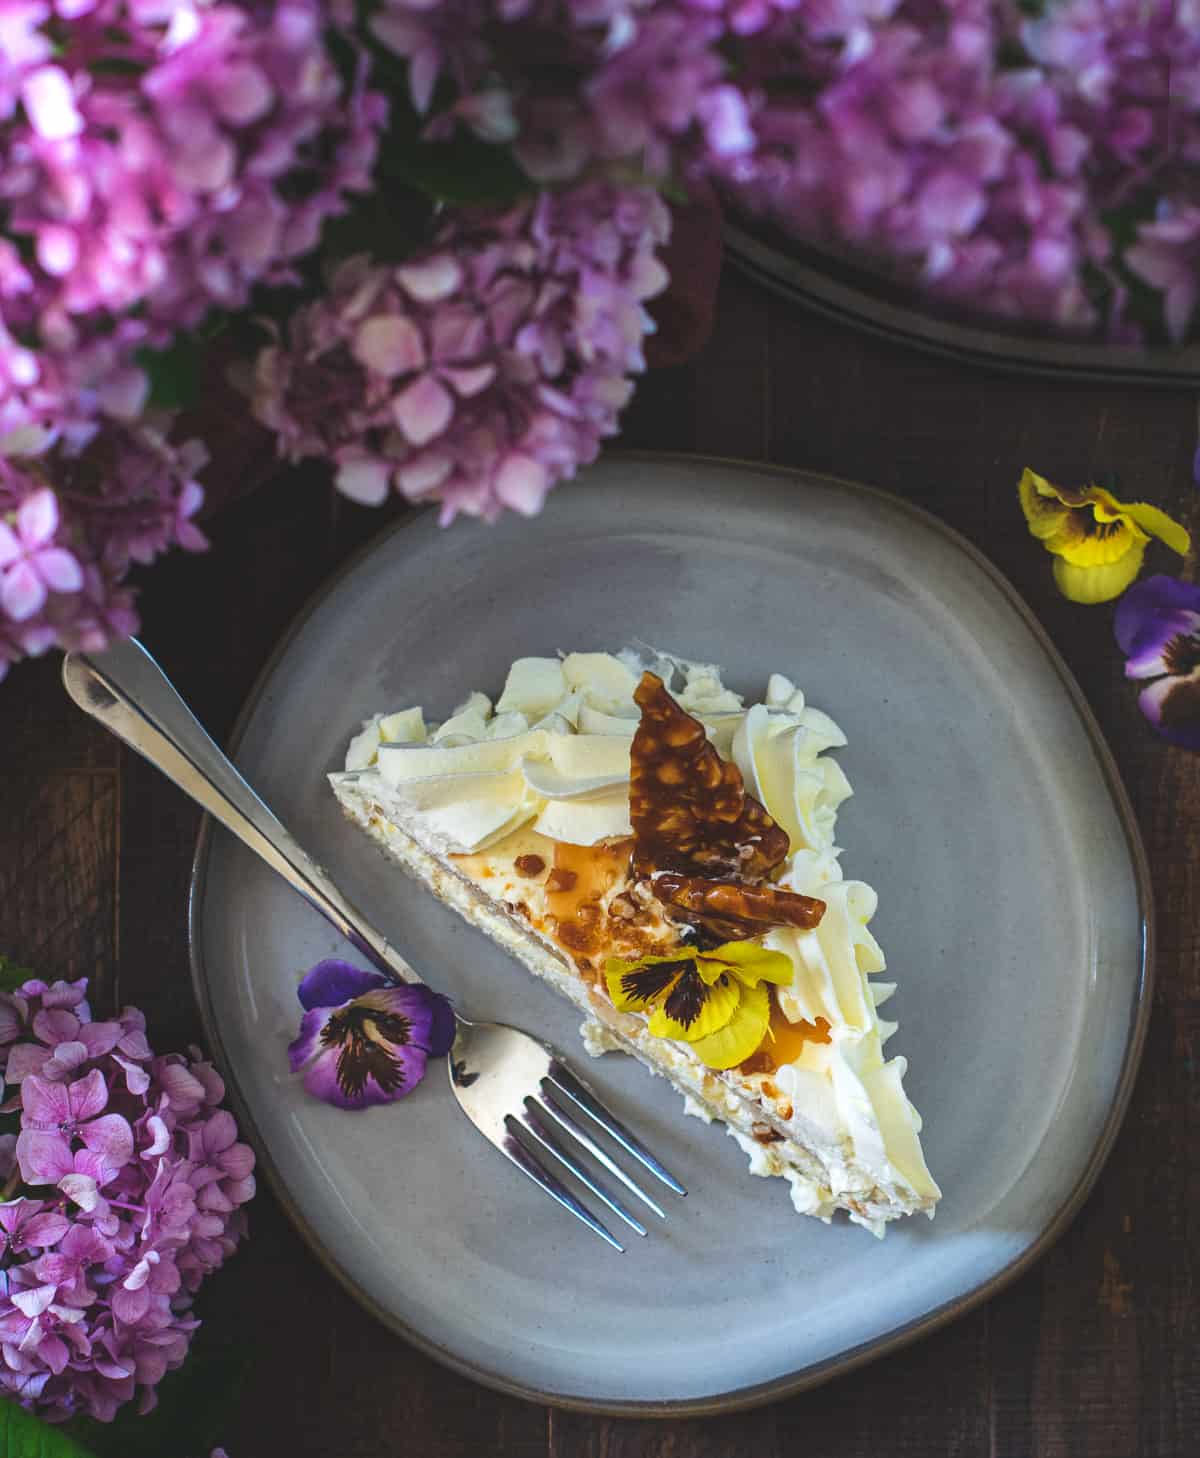 Cake slice on the plate surrounded with flowers